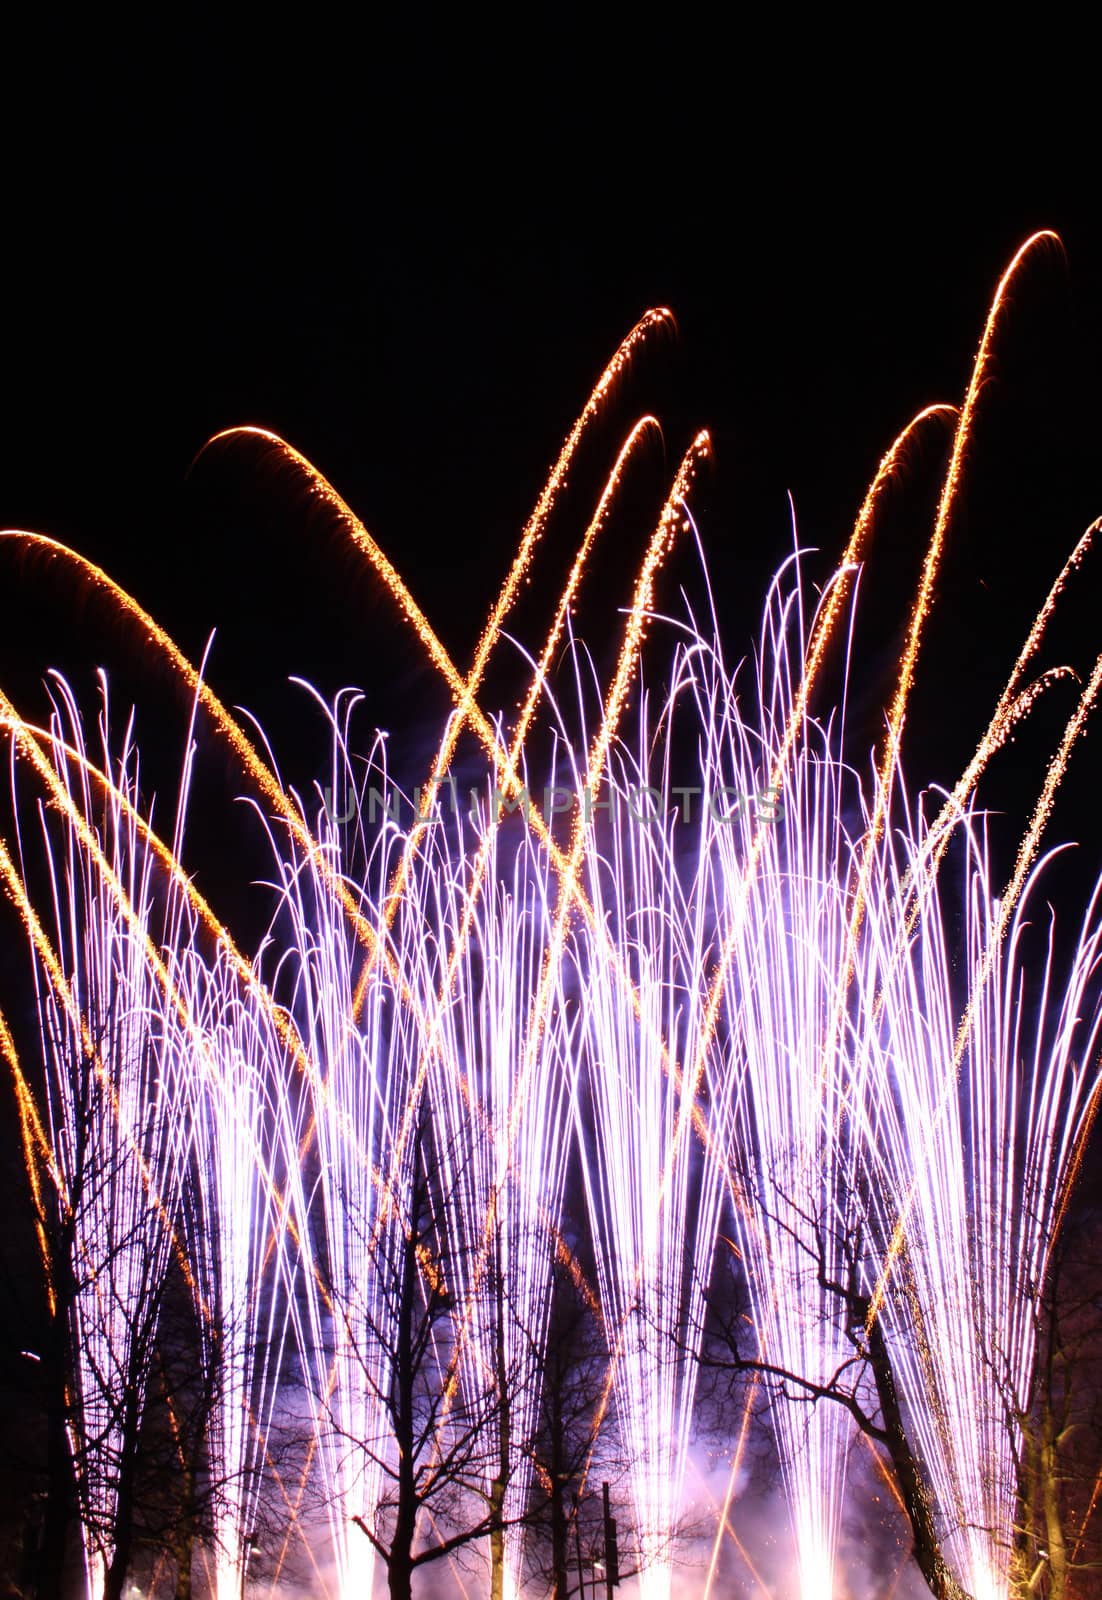 Colorful fireworks display against park trees silhouette and black sky